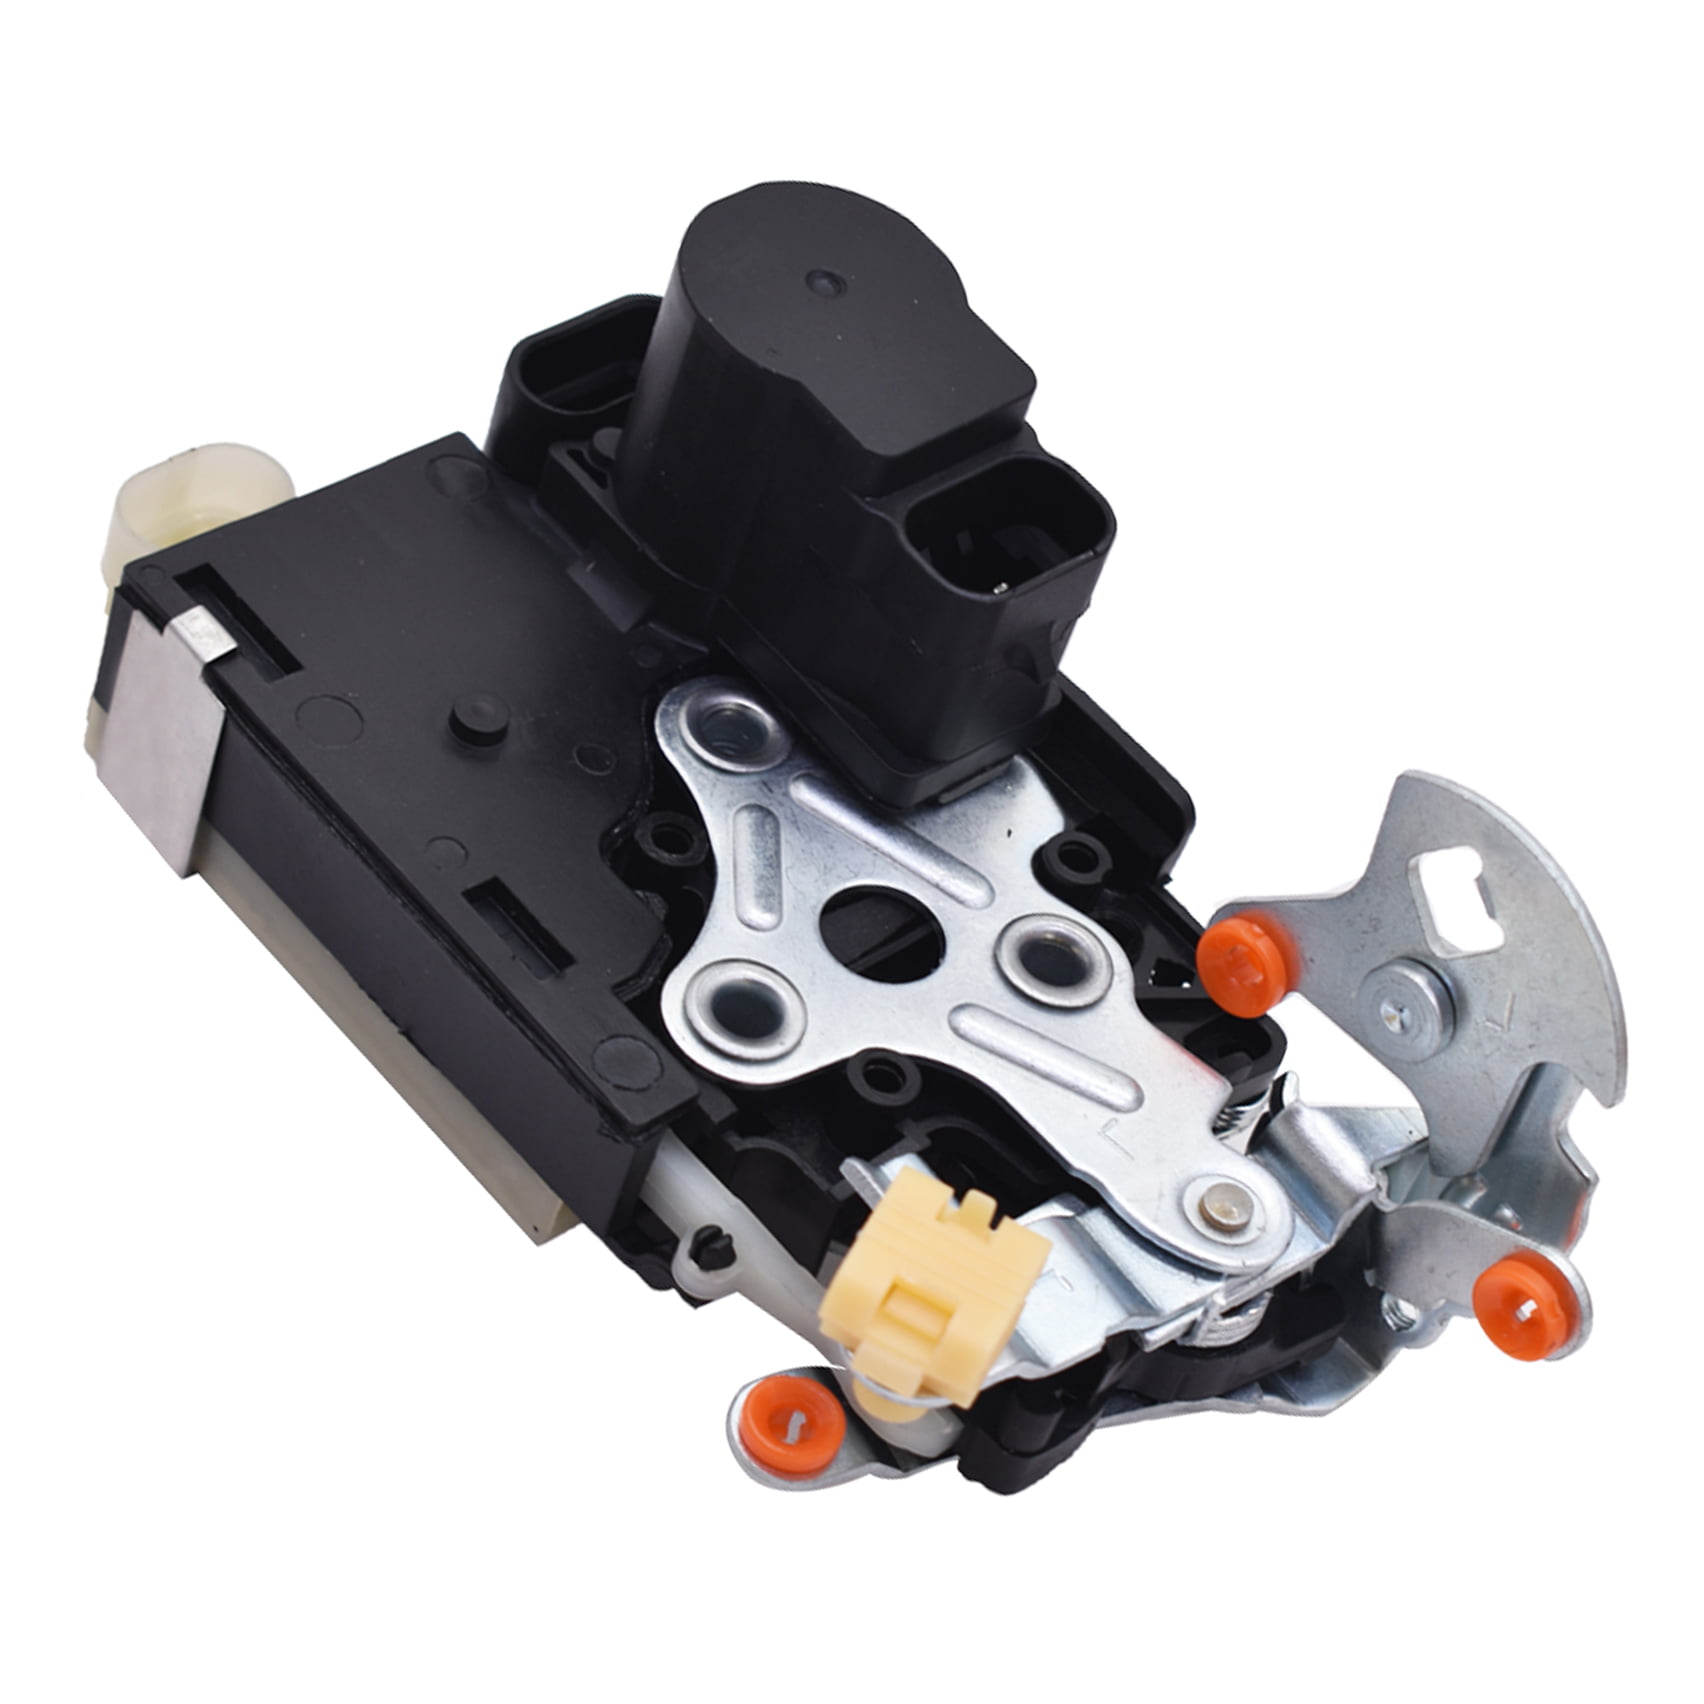 Front Left Front Left Right Side Power Door Latch Lock Actuator Motor Assembly 931-319 15053682 931-318 15053681 Fit for 2001-2003 Cadillac Chevrolet Suburban GMC Sierra 1500